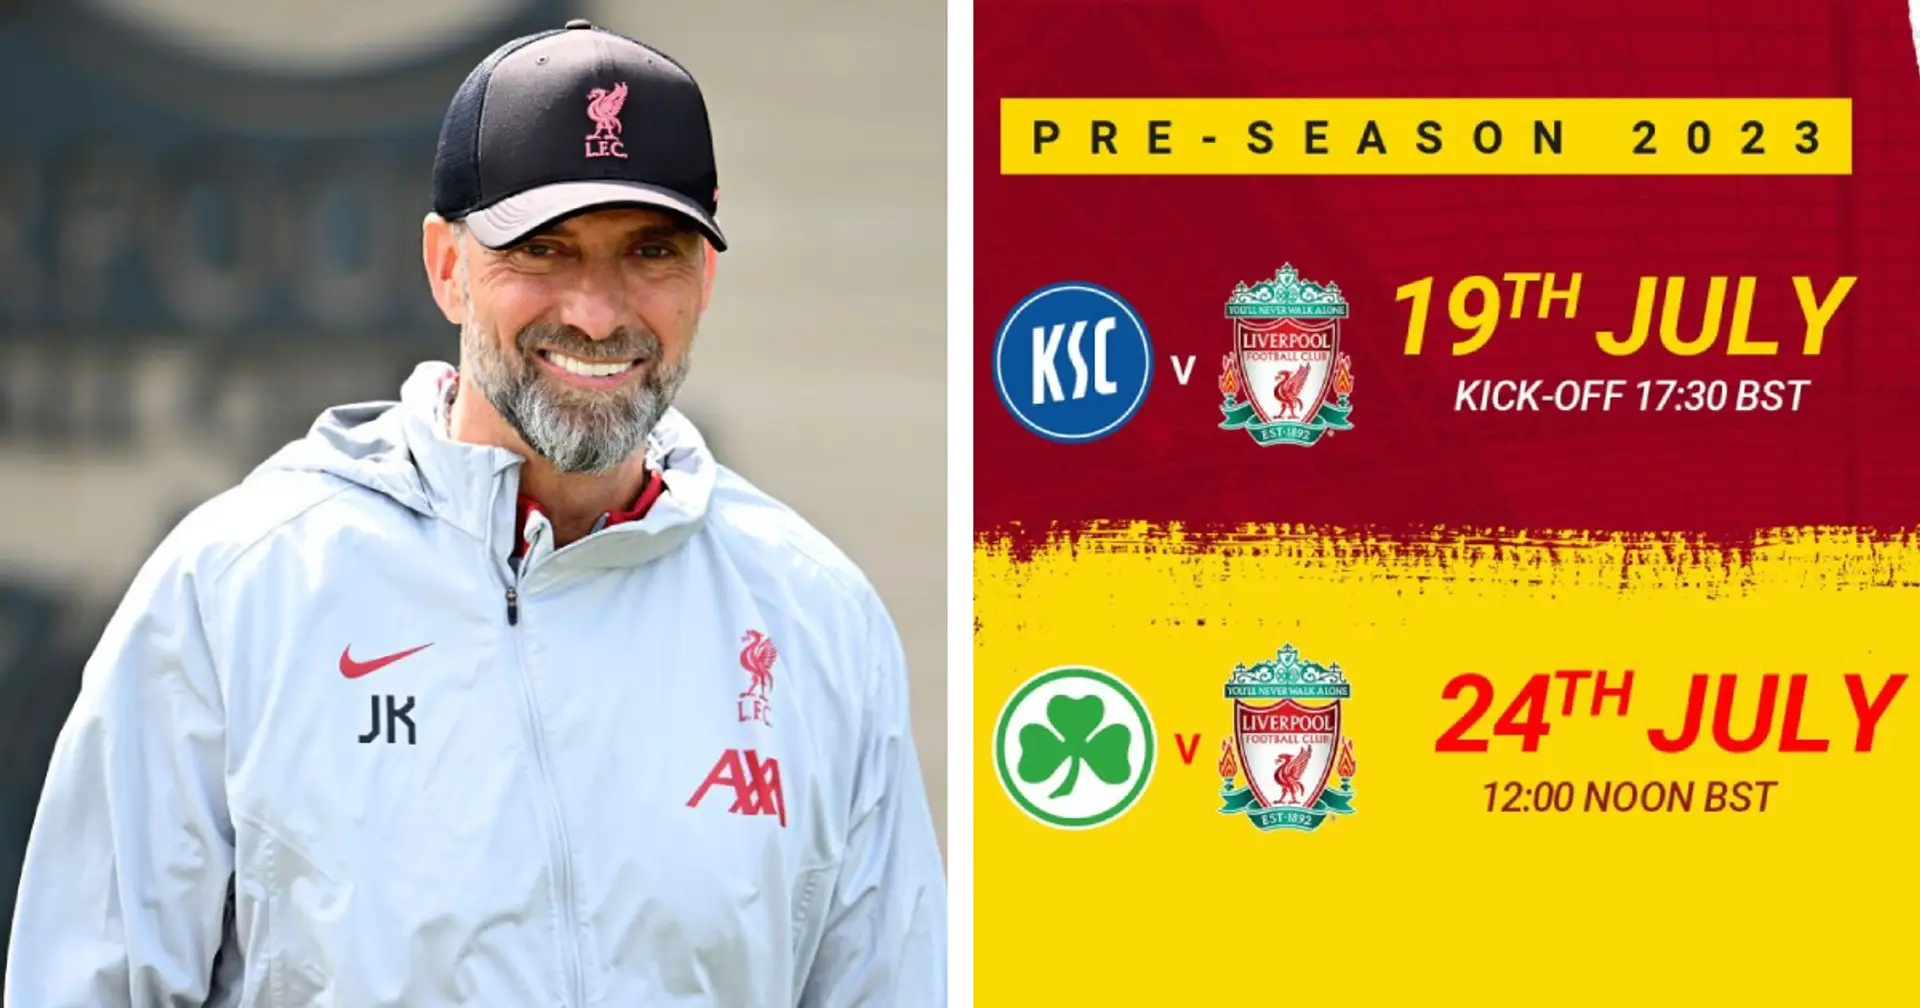 Liverpool confirm two pre-season games in Germany